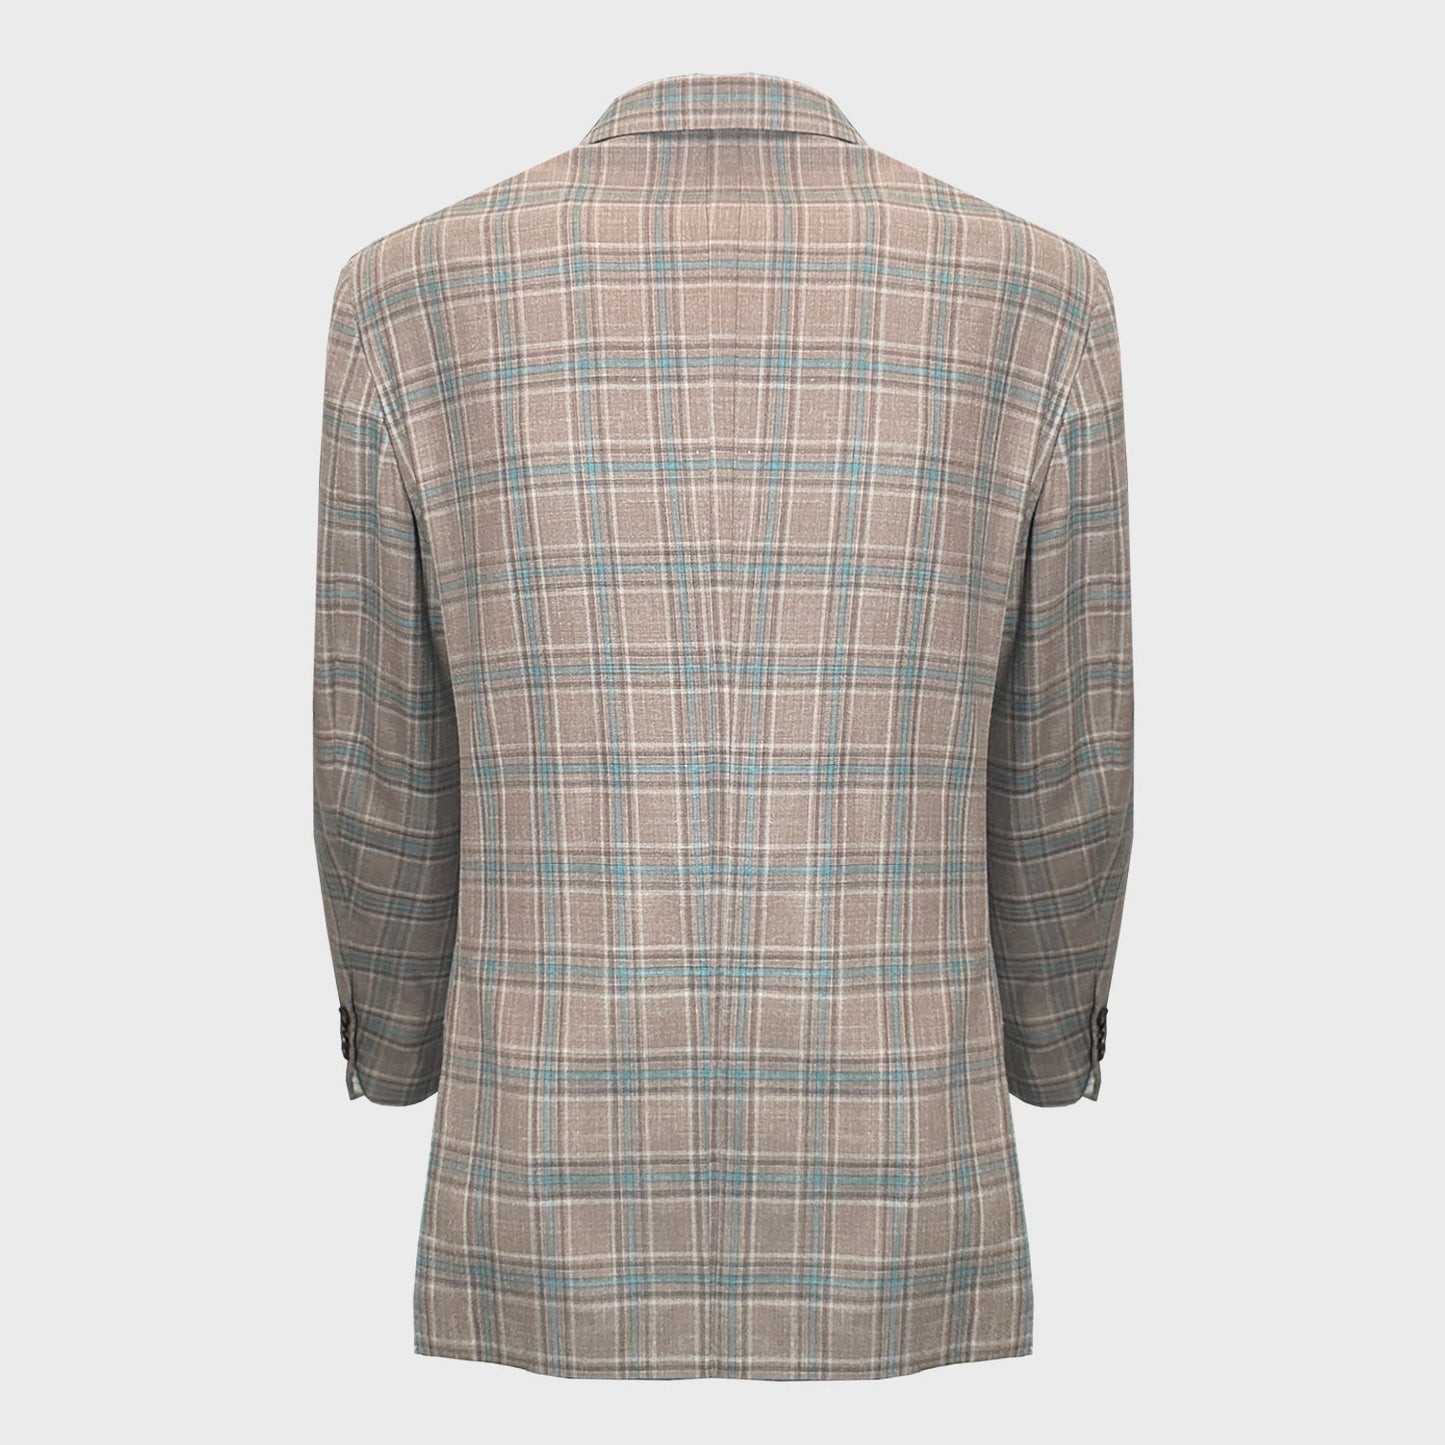 This Caruso men's tailored jacket crafted in Italy for Wools Boutique Uomo, vintage charm with a stonewall background color with a elegant turquoise and coffee brown windowpane pattern. Unlined for a relaxed feel, it effortlessly complements both formal office outfit with tie and leisurely.